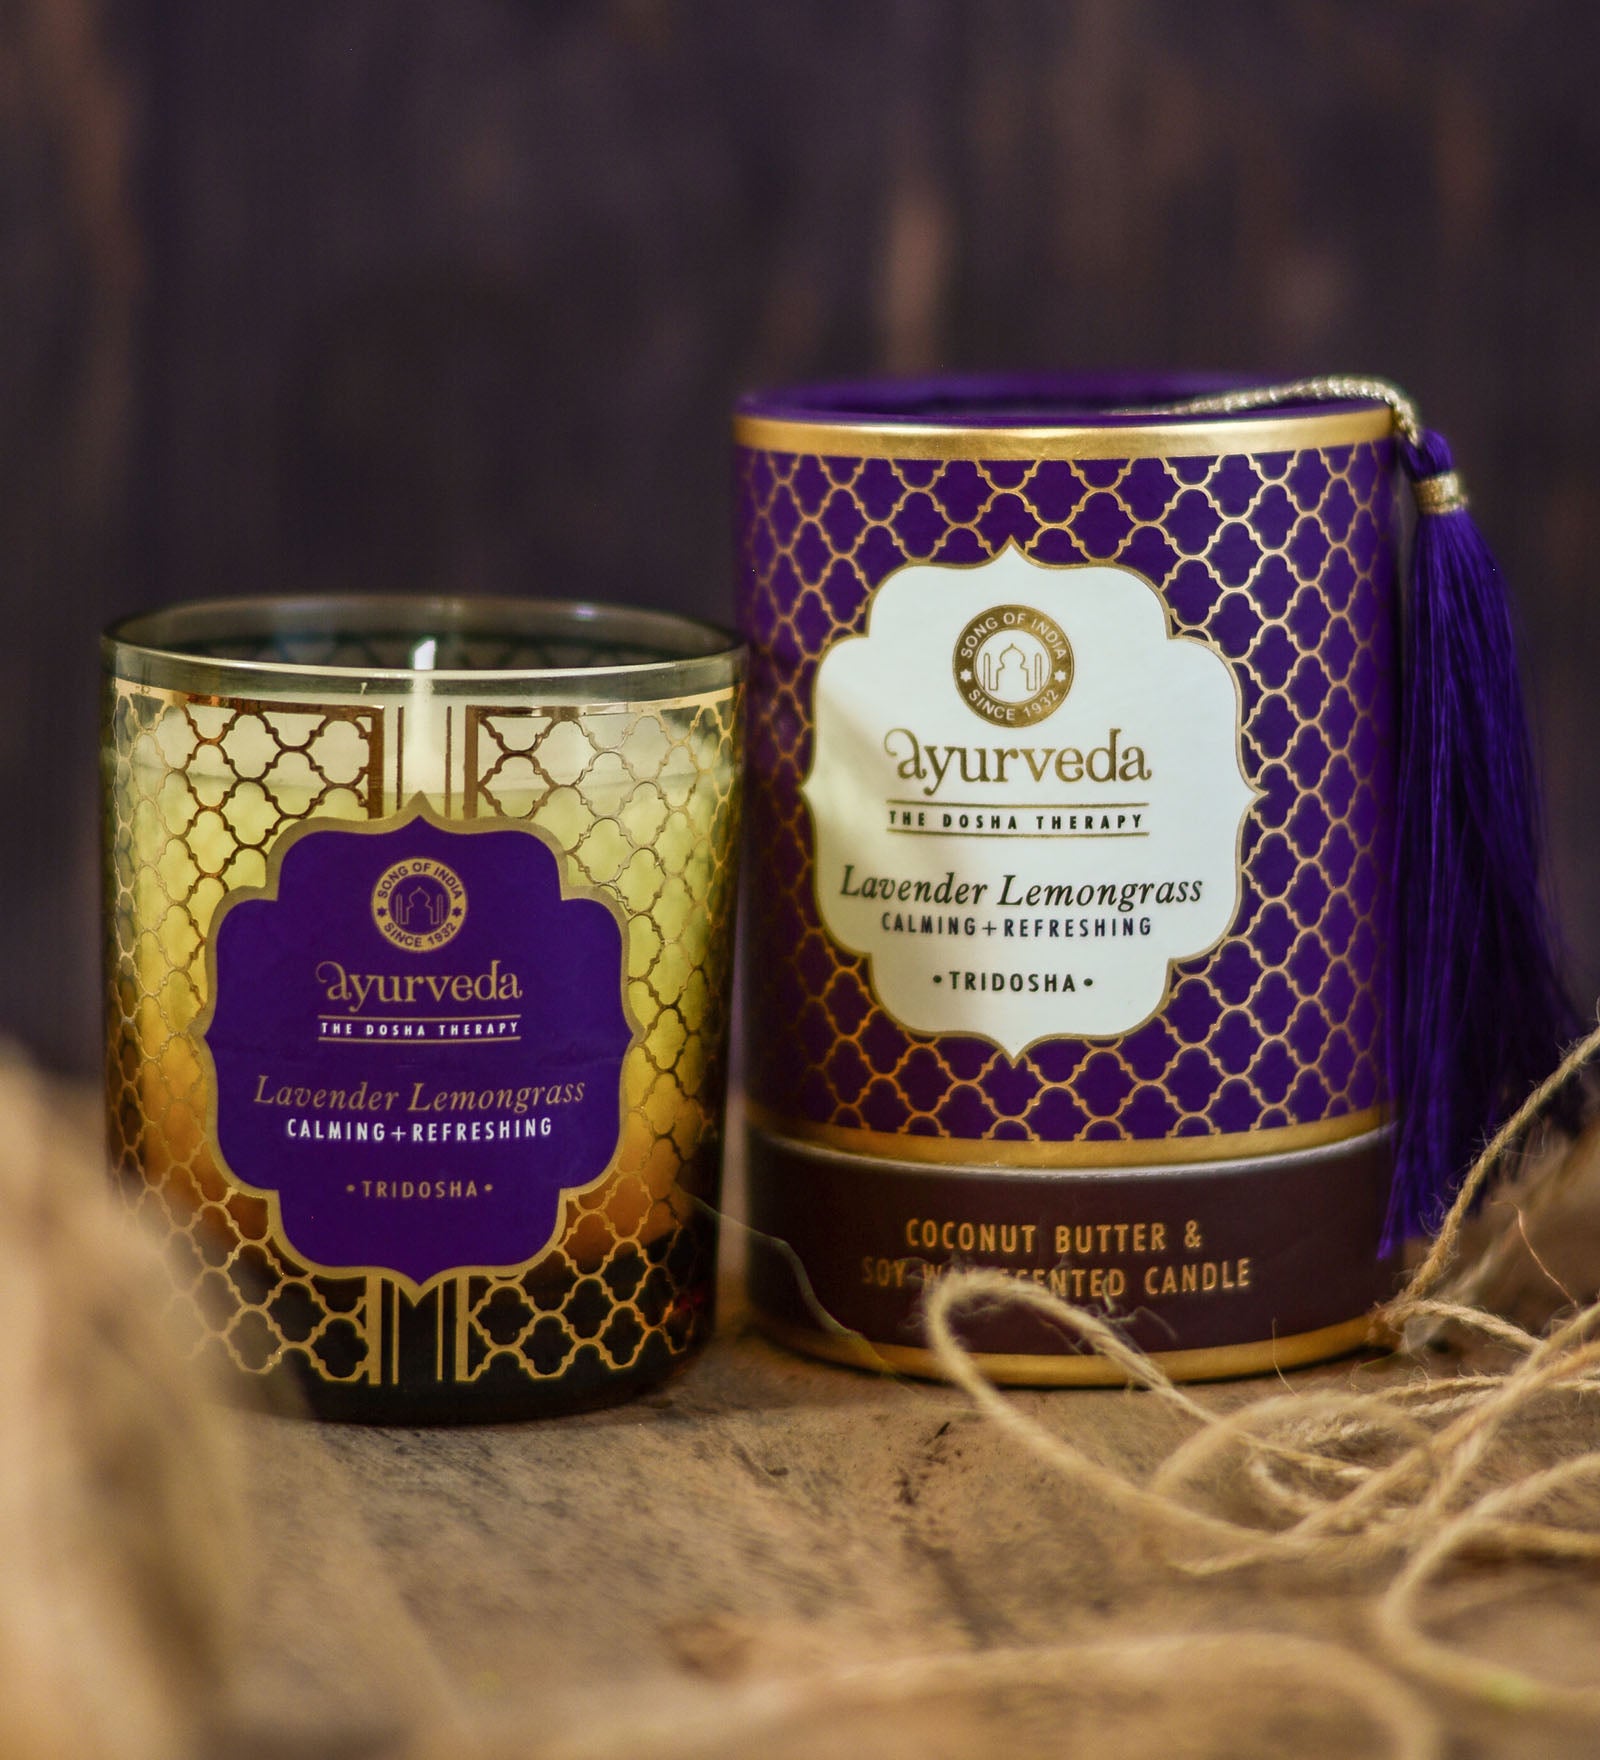 Song of India 200 g. Lavender Lemongrass Luxurious Veda Scented Candle in Brown Colored Glass Jar